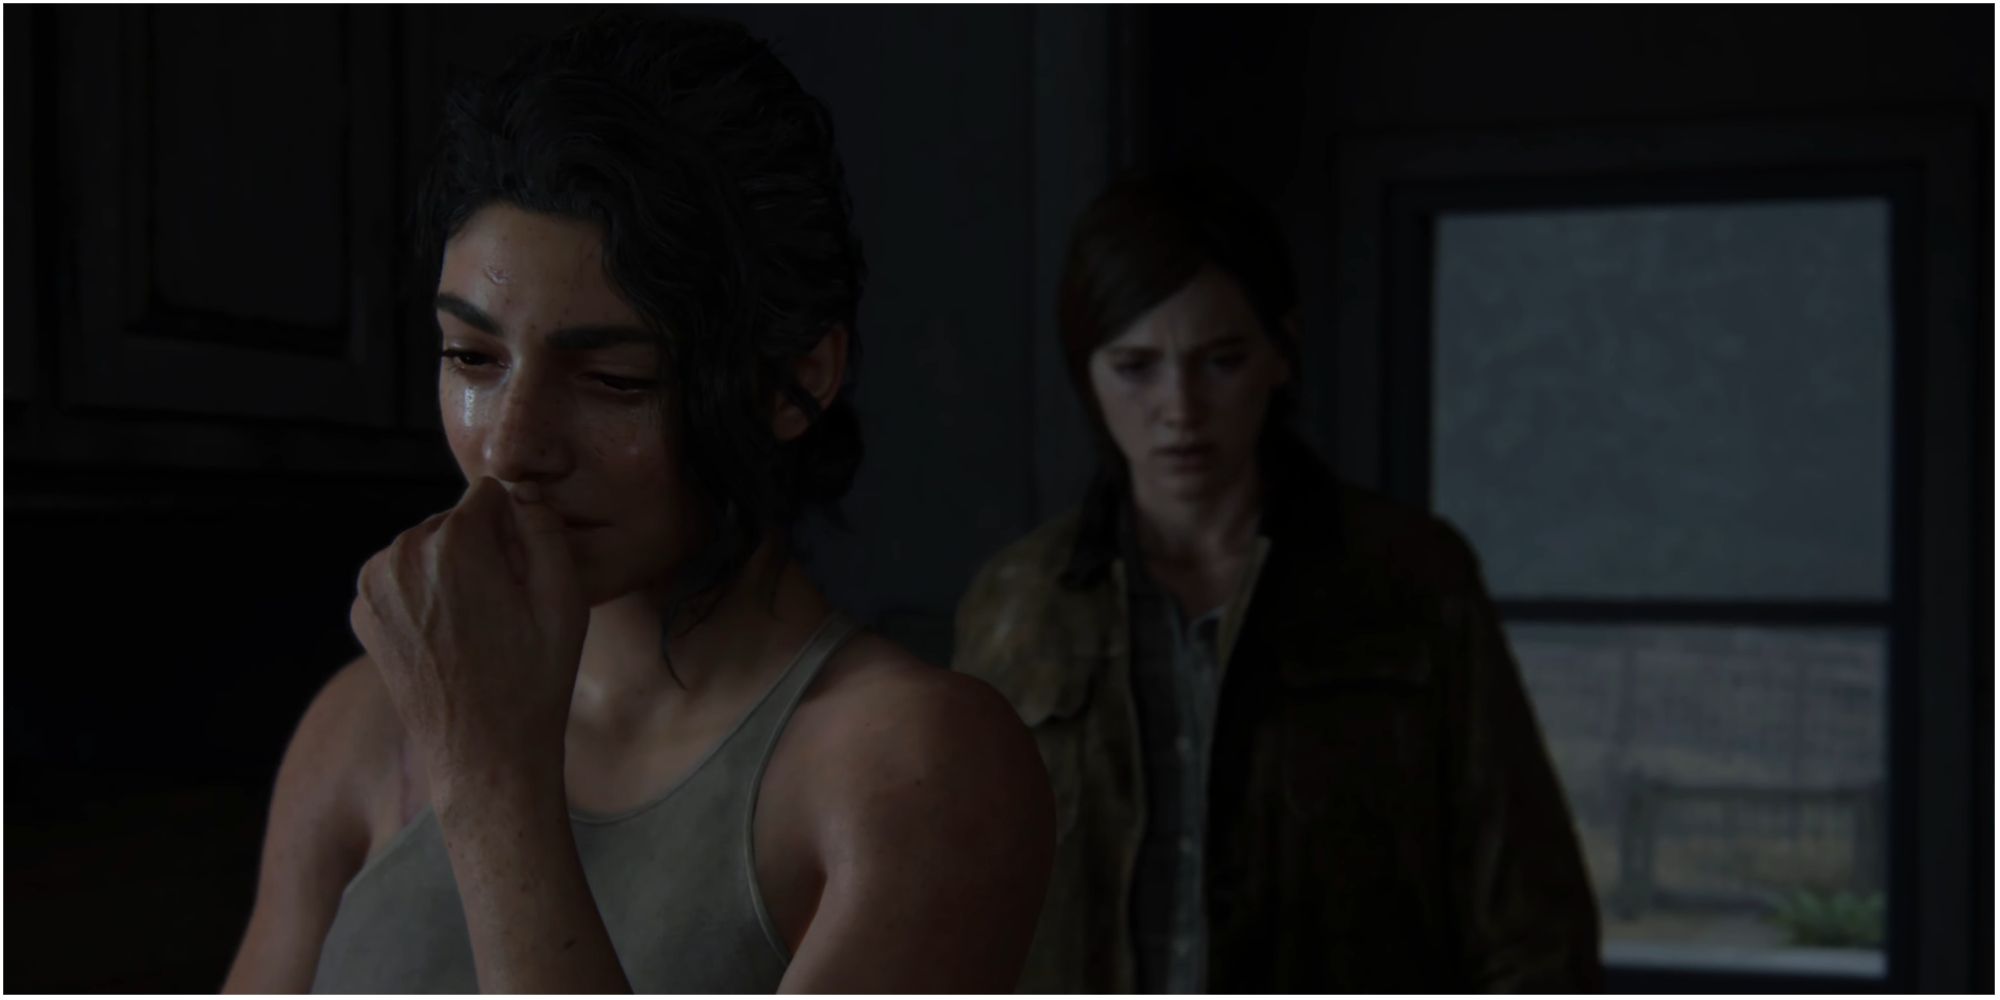 Hit game 'The Last of Us Part II' features Dina, a Jewish